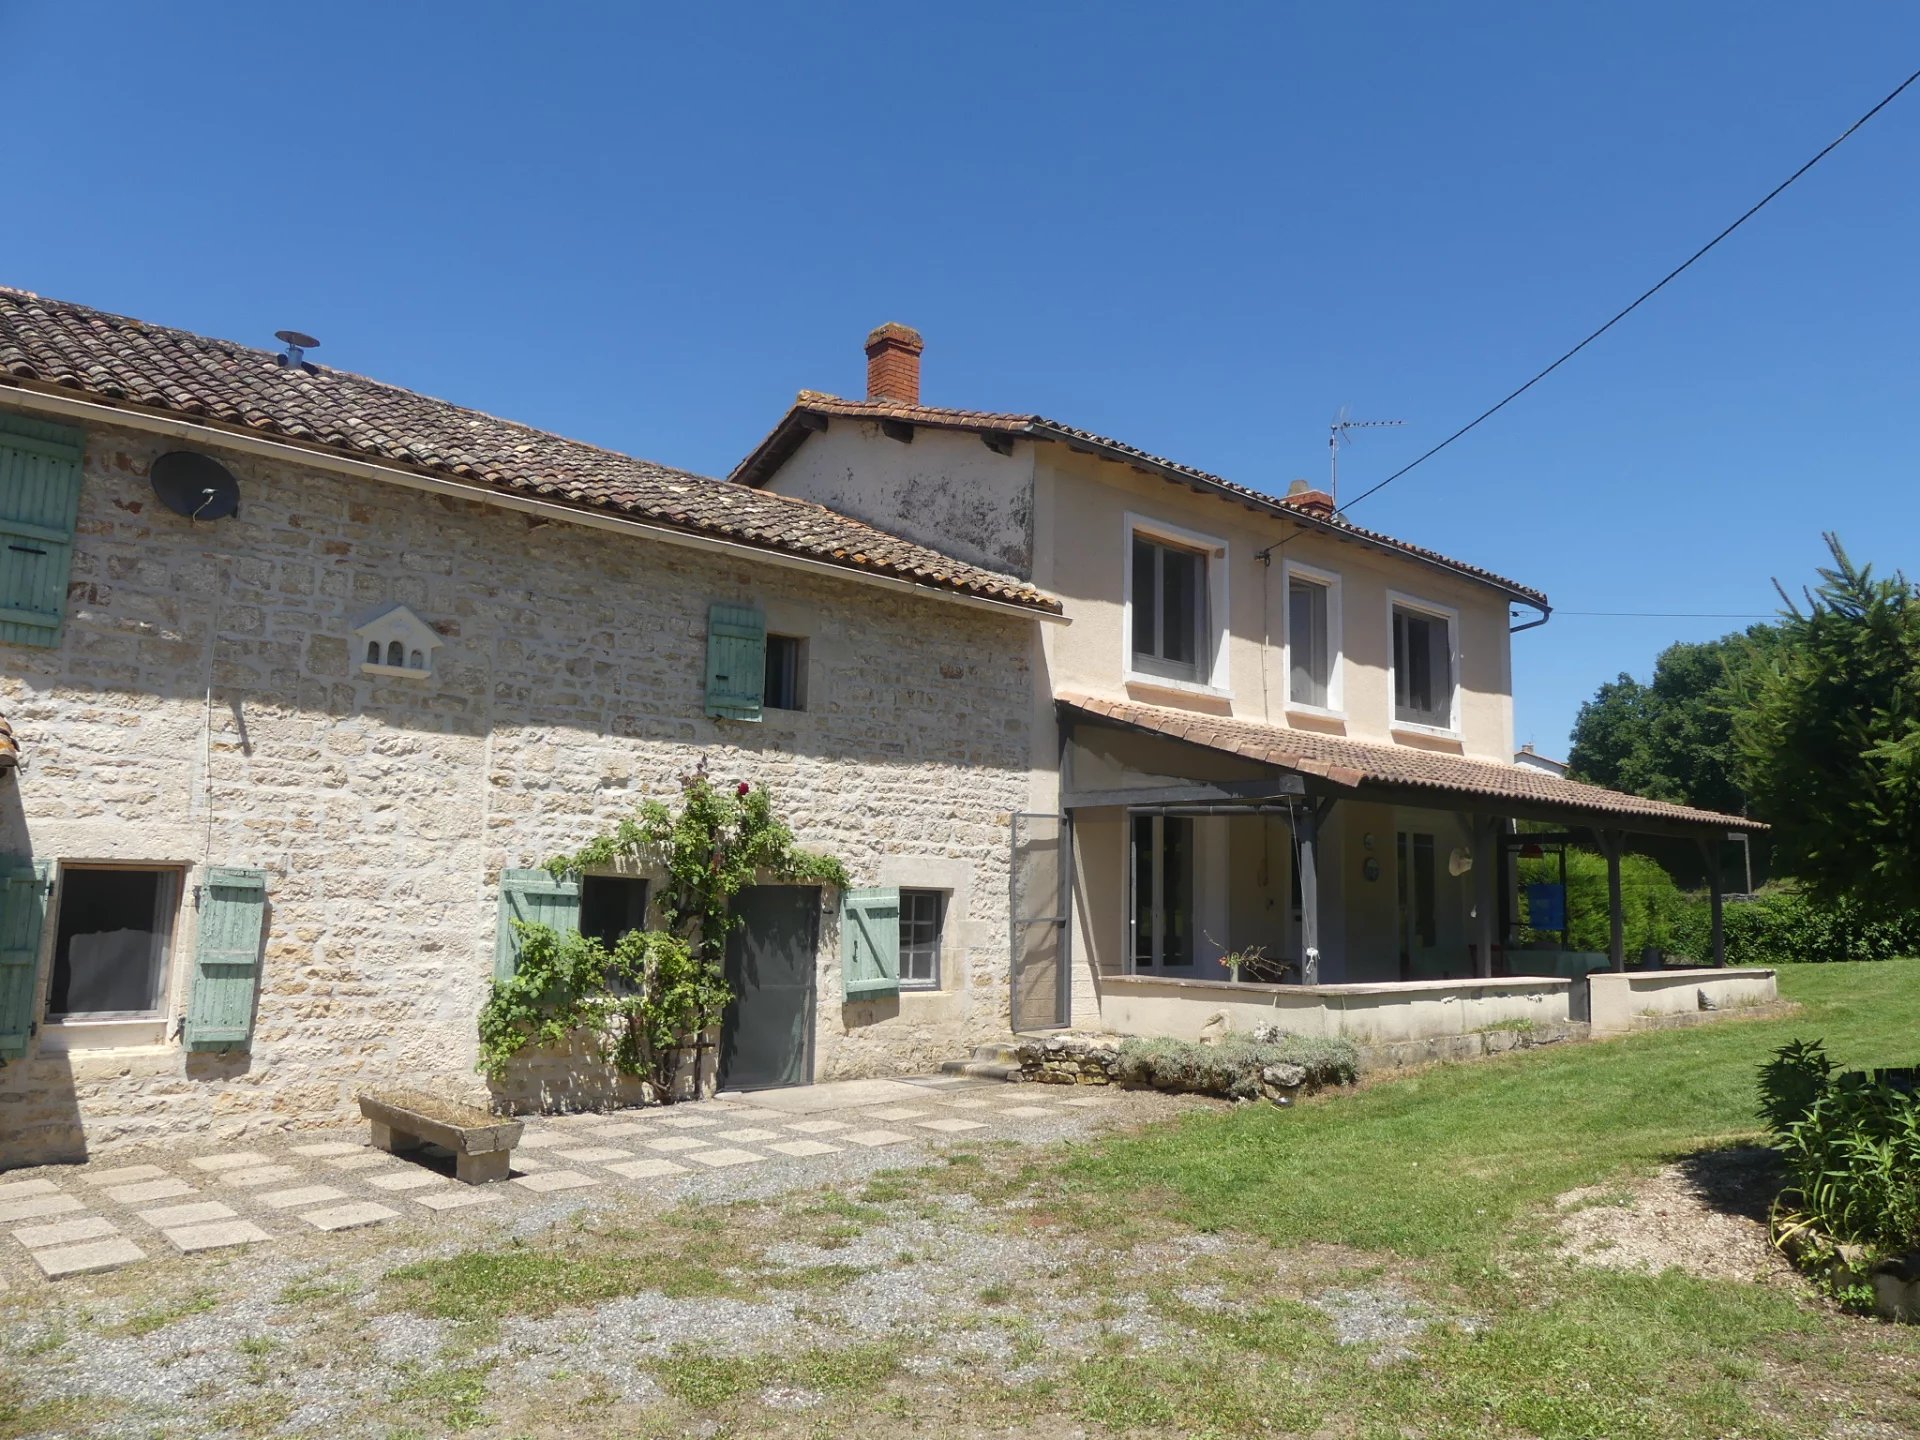 Attractive property with gite, barns and large garden